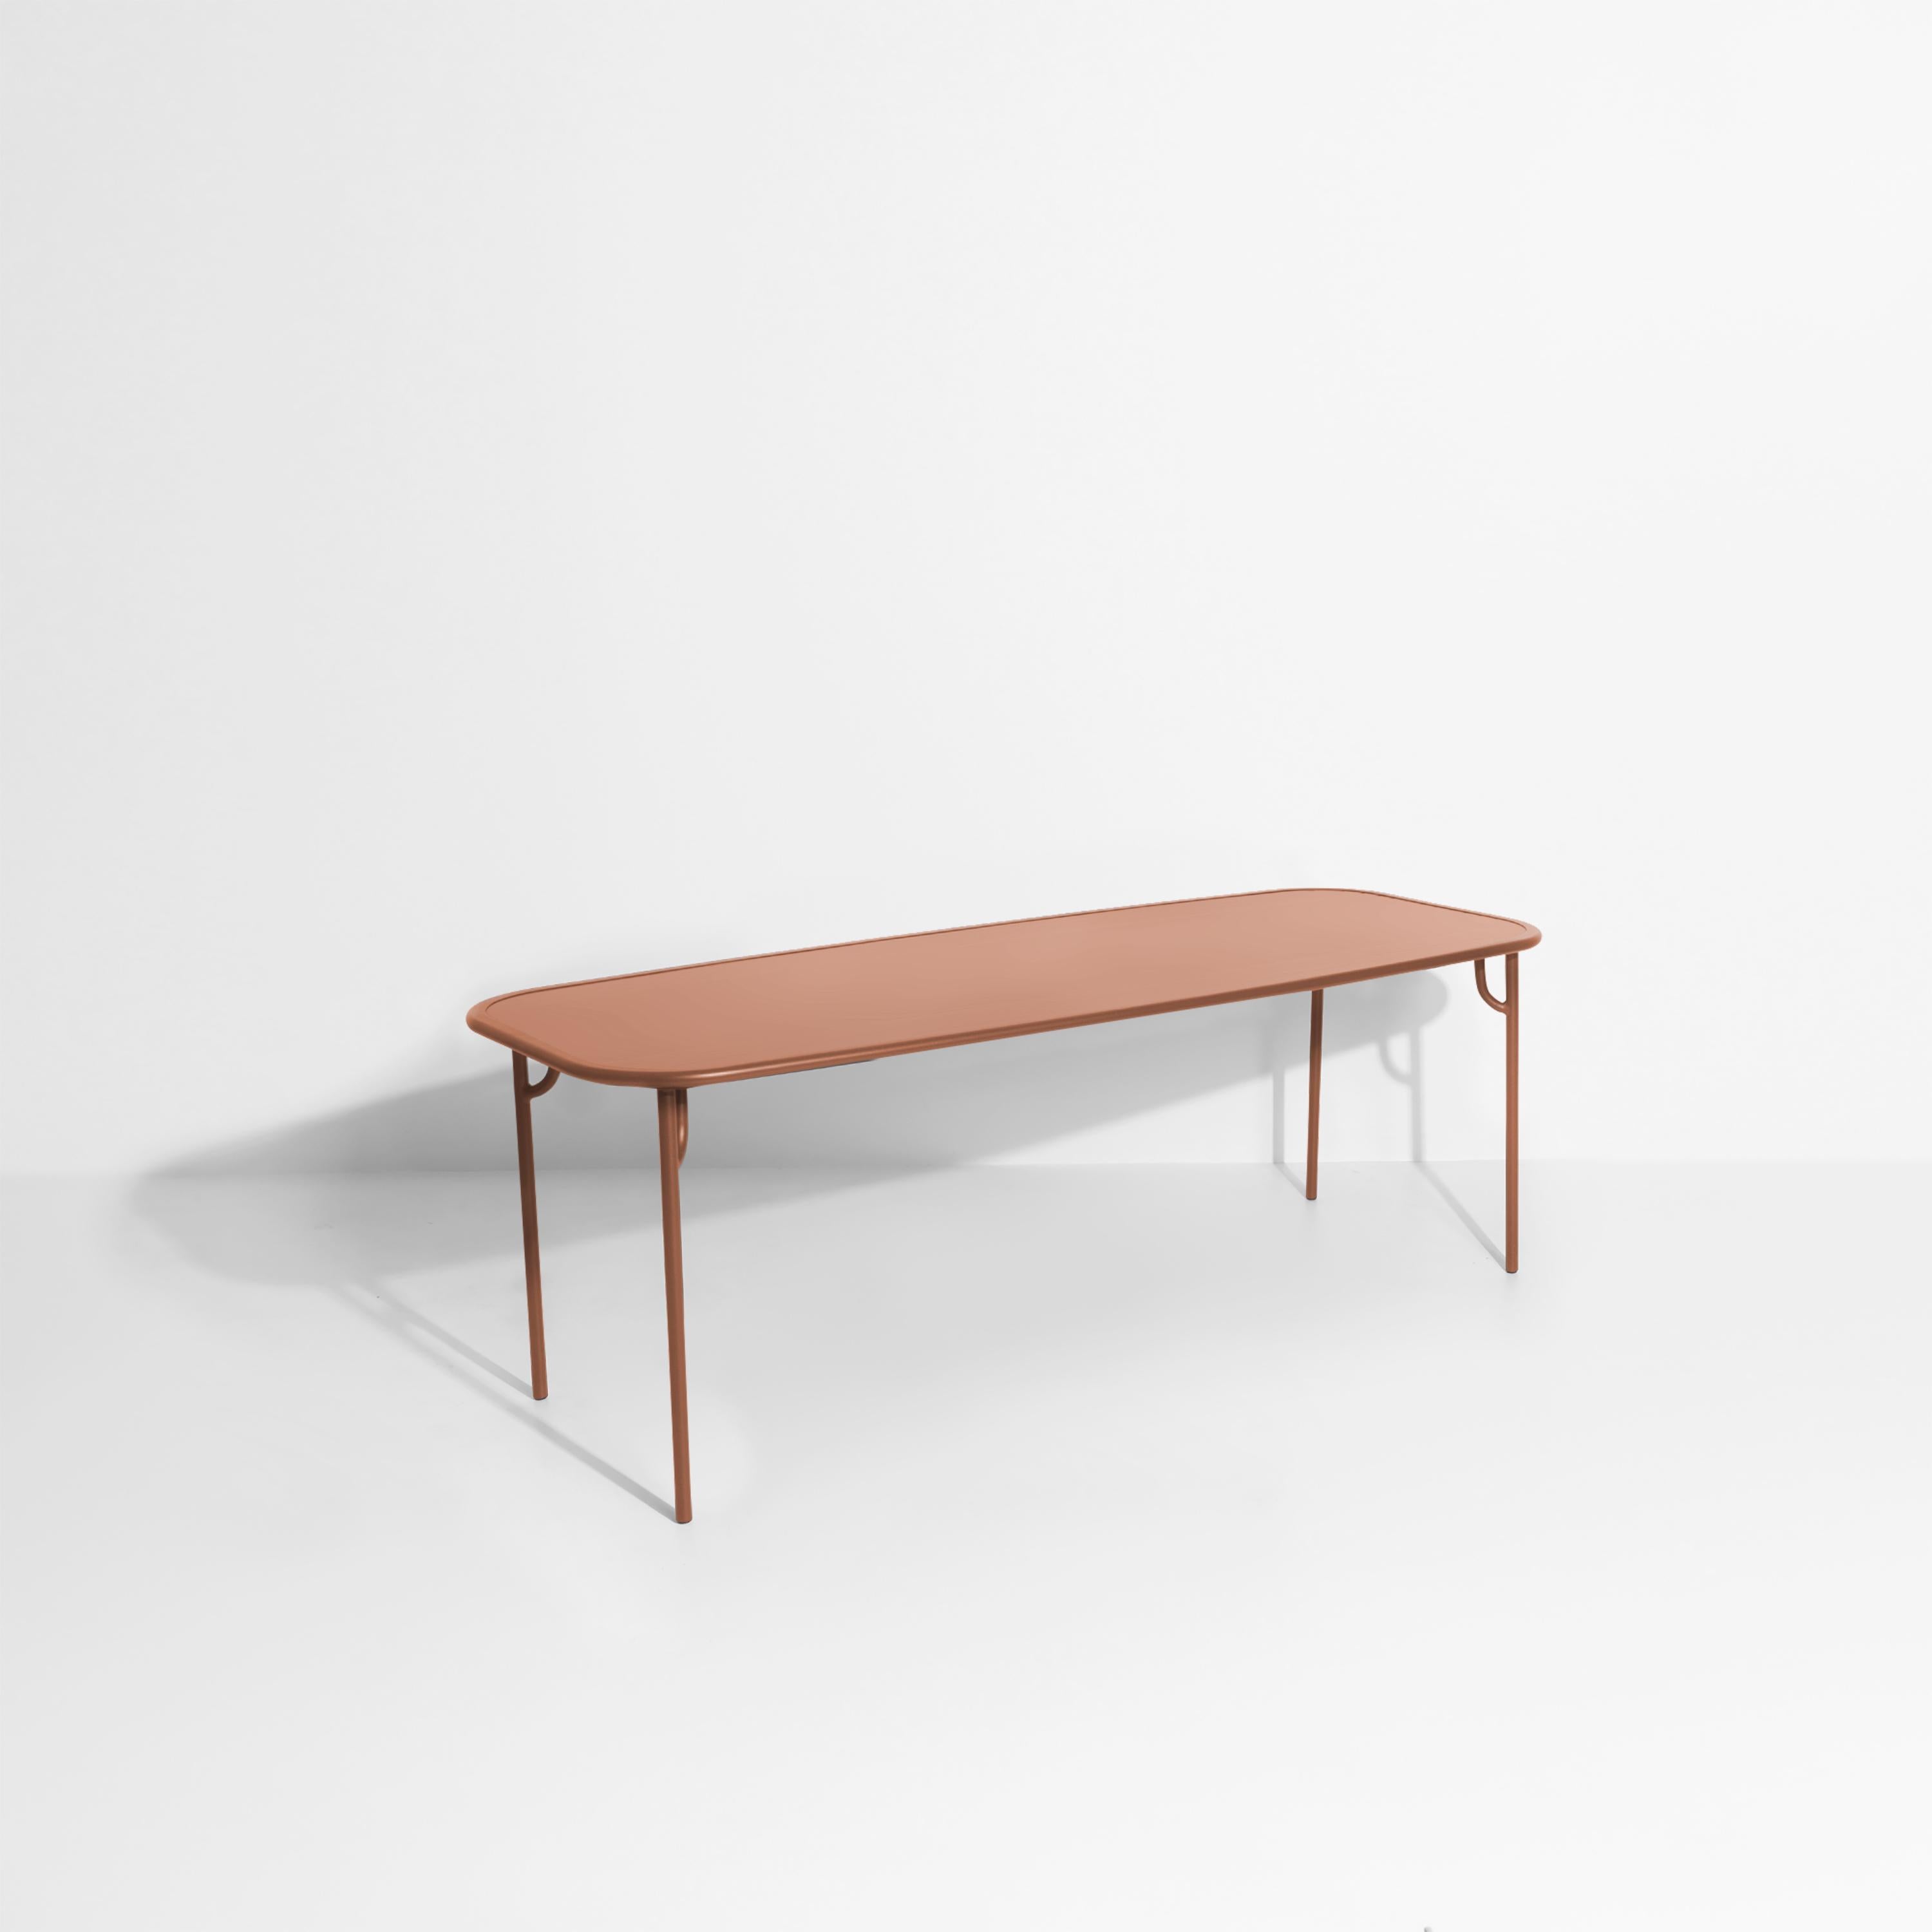 Petite Friture Week-End Large Plain Rectangular Dining Table in Terracotta Aluminium by Studio BrichetZiegler, 2017

The week-end collection is a full range of outdoor furniture, in aluminium grained epoxy paint, matt finish, that includes 18